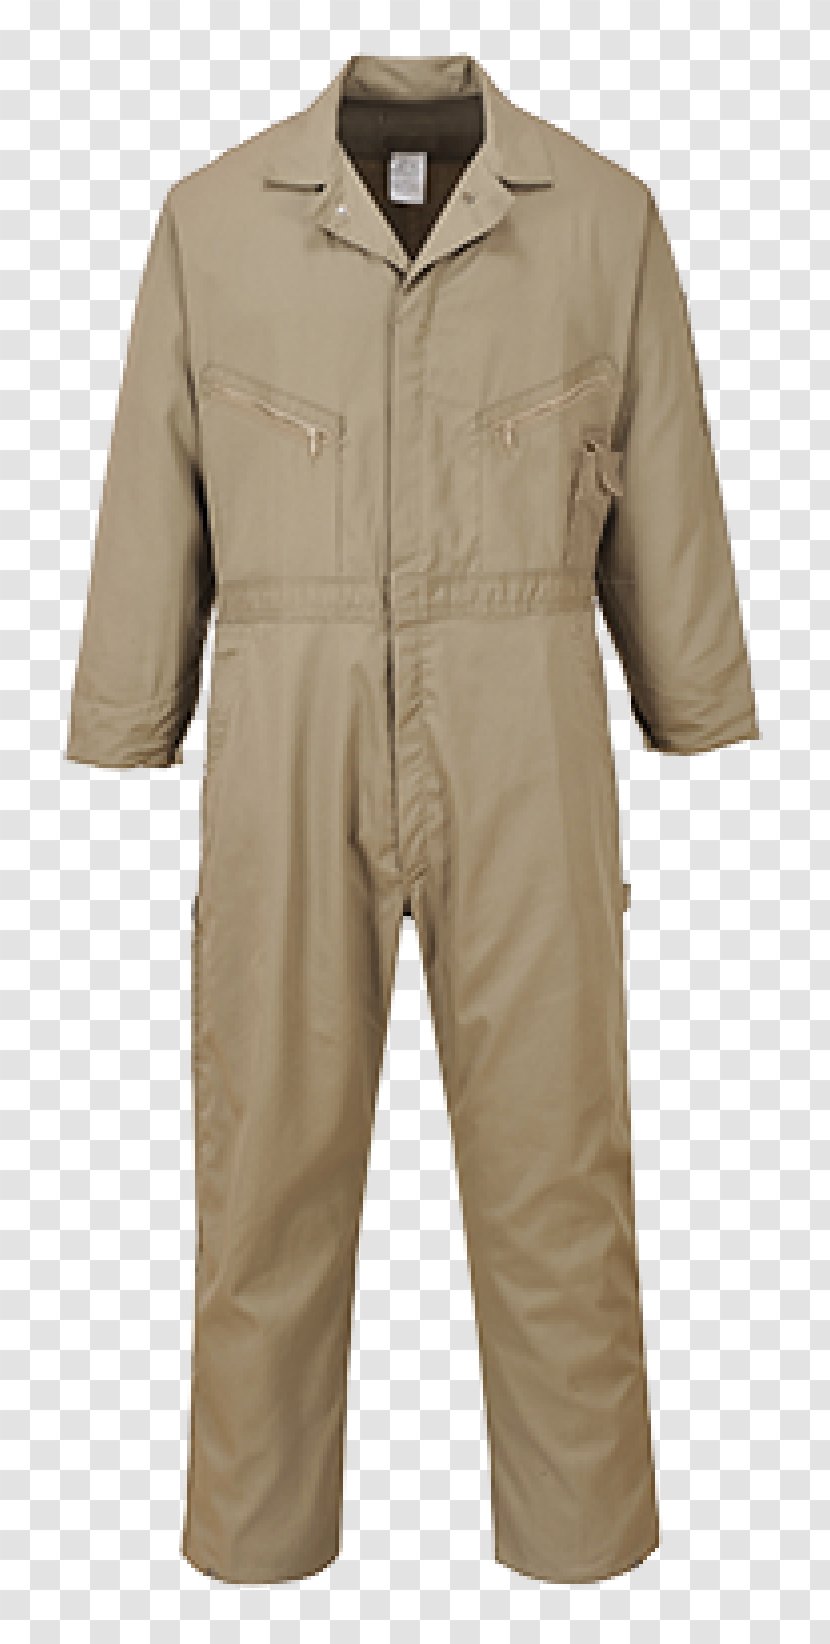 Overall Boilersuit Workwear Portwest Clothing - Steeltoe Boot - Overalls Transparent PNG